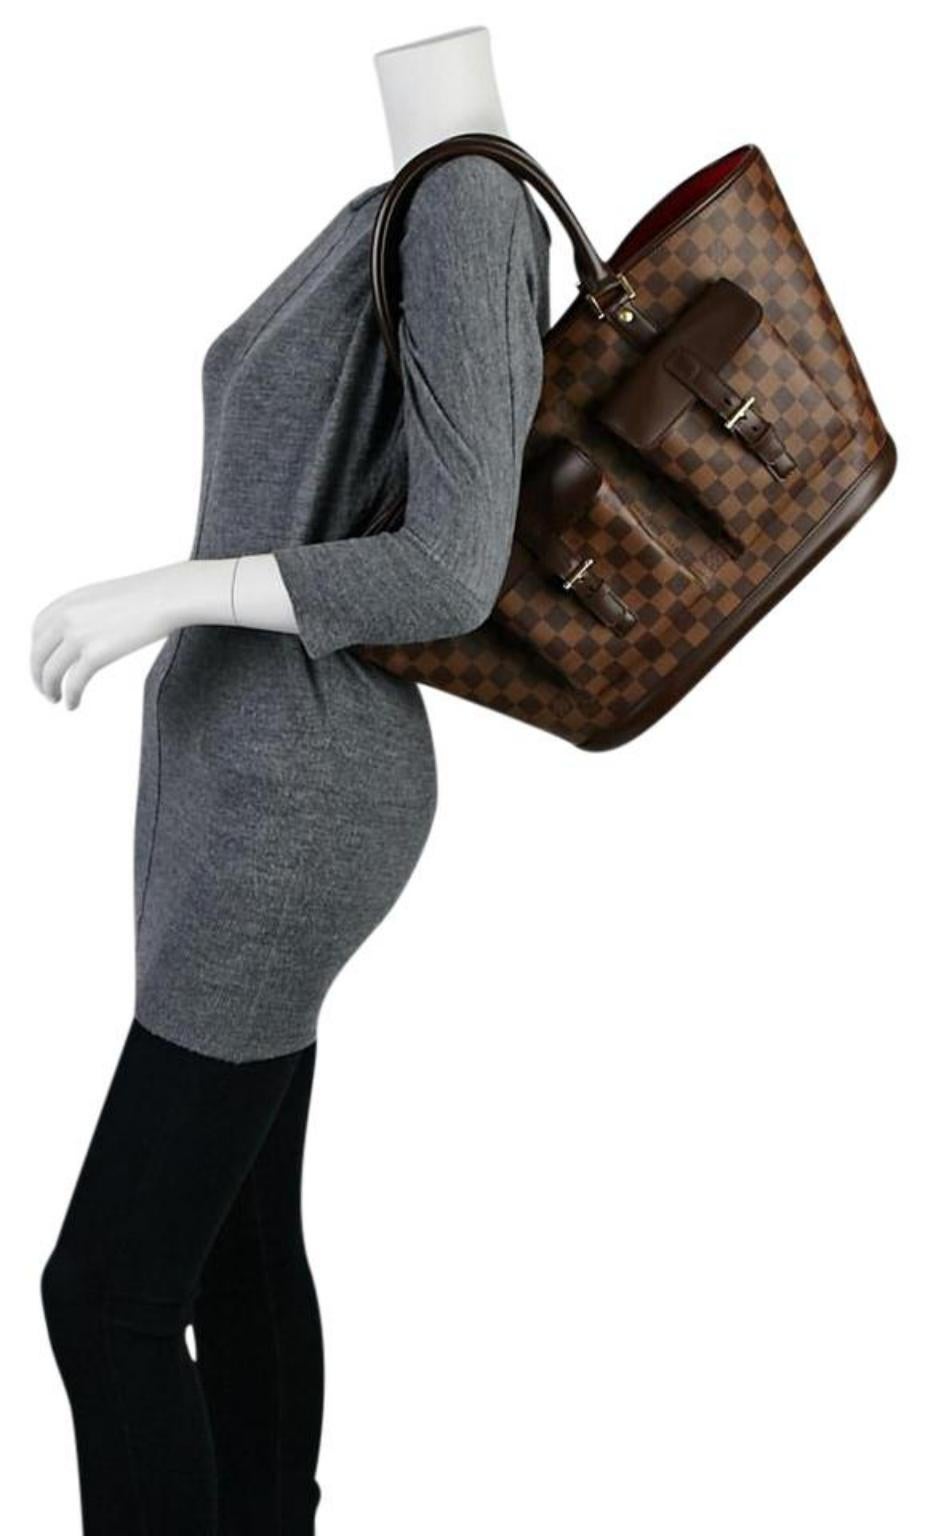 Louis Vuitton Manosque Damier Ebene Gm 223979 Brown Coated Canvas Tote In Good Condition For Sale In Forest Hills, NY